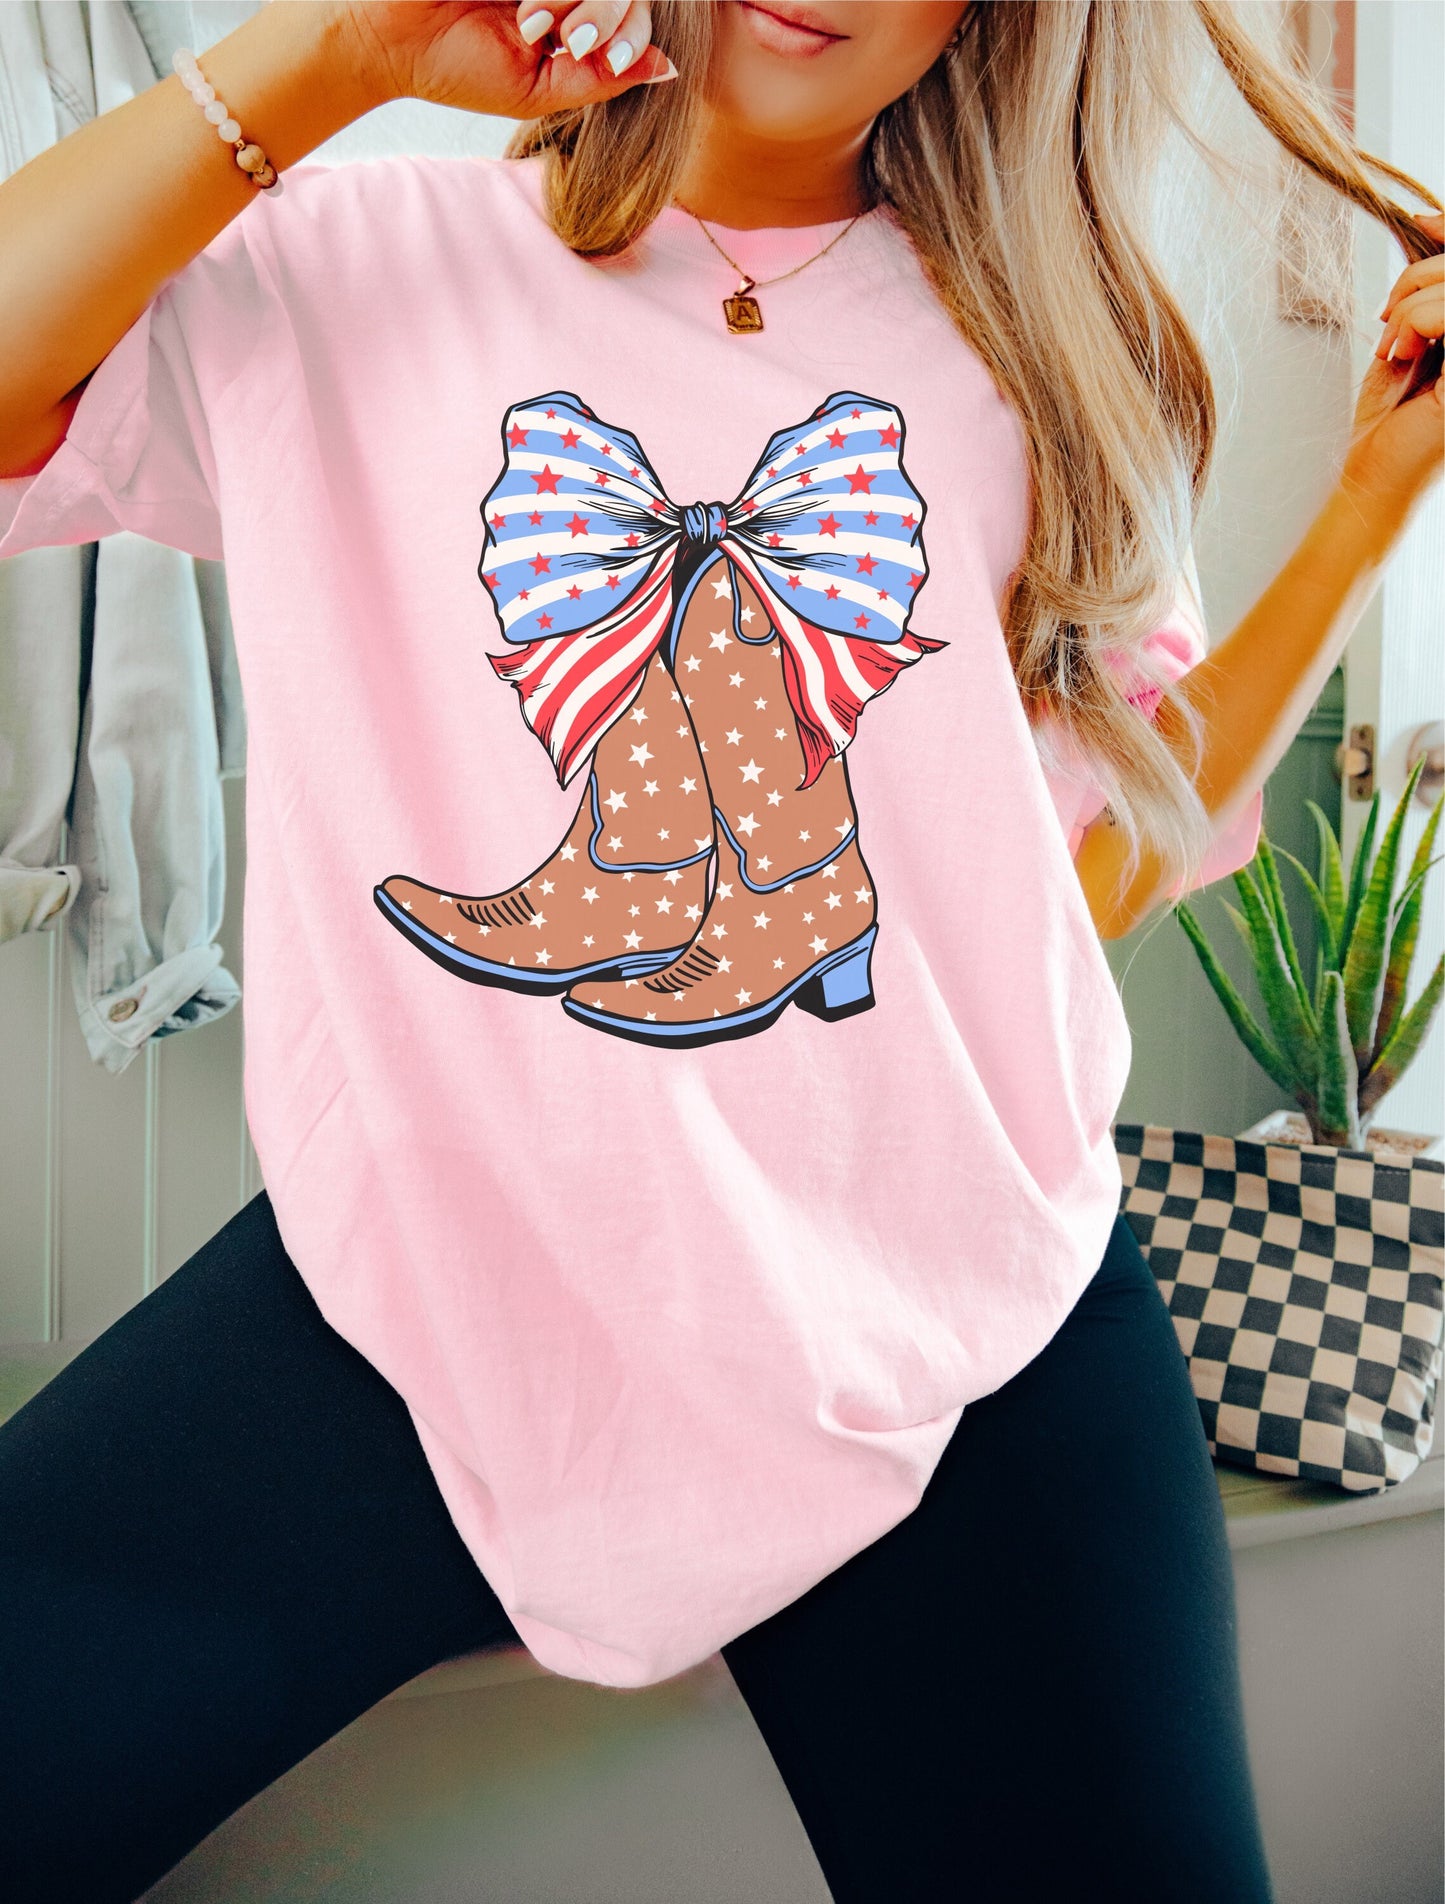 Cowgirl Boots Big Bow July 4th Shirt, Coquette 4th of July Shirt, Retro 4th of July Shirt, Comfort Colors Tee, Summer Tee, Coquette Cowgirl